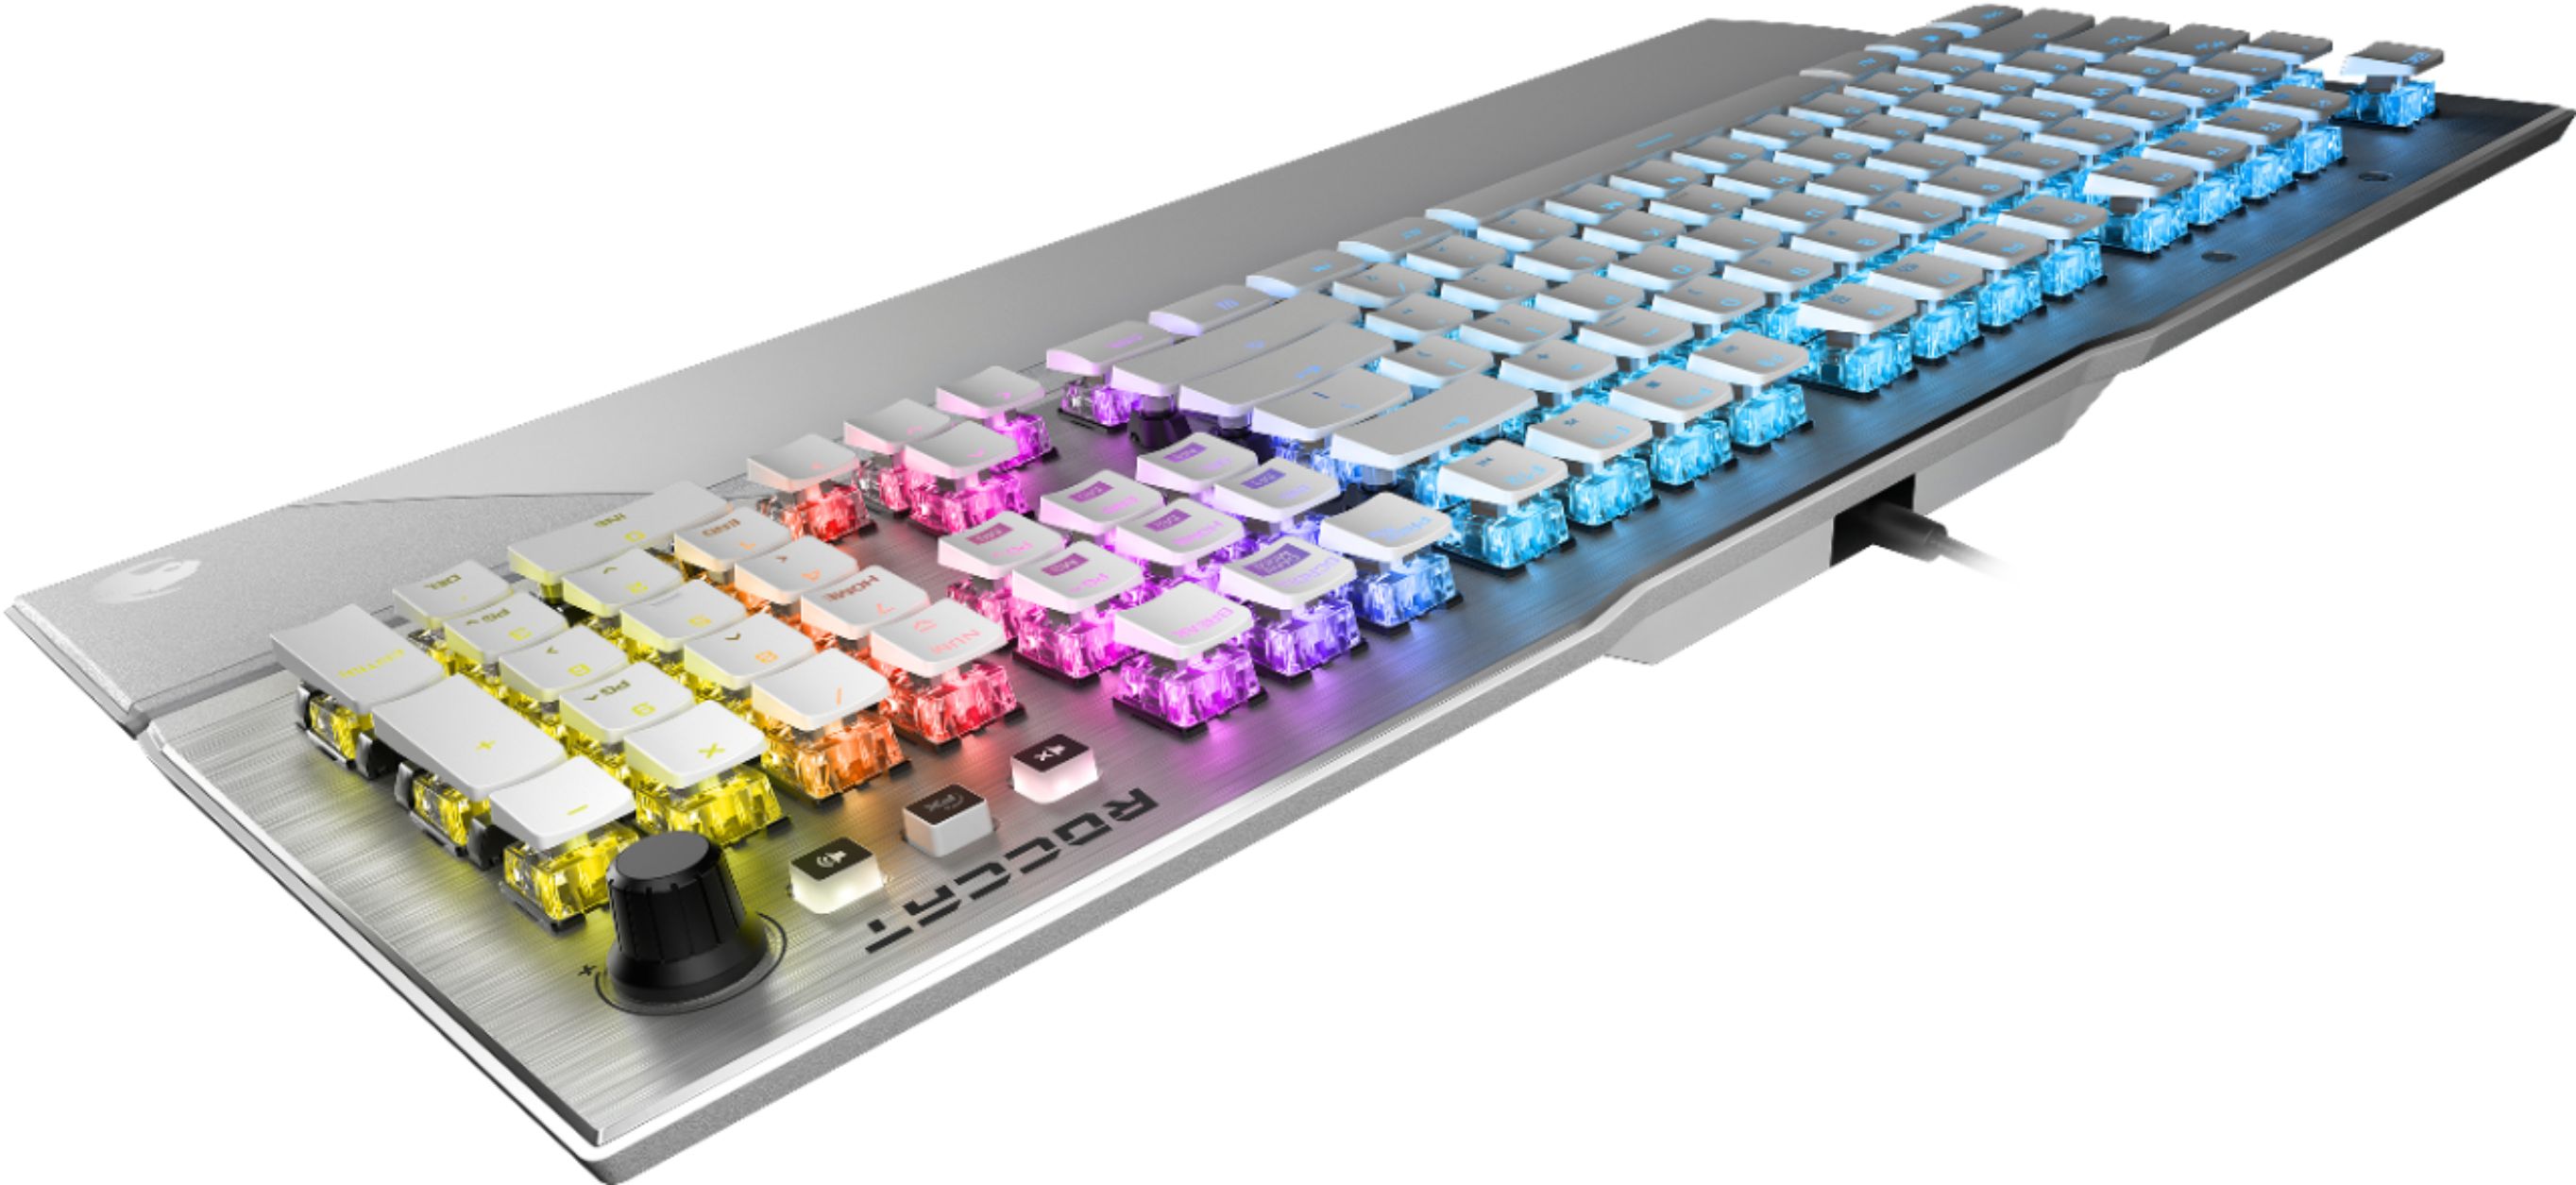 Angle View: ROCCAT - Vulcan 122 Full-size Mechanical PC Gaming Keyboard with Tactile Titan Switch, AIMO RGB Lighting and Detachable Palm Rest - Arctic White